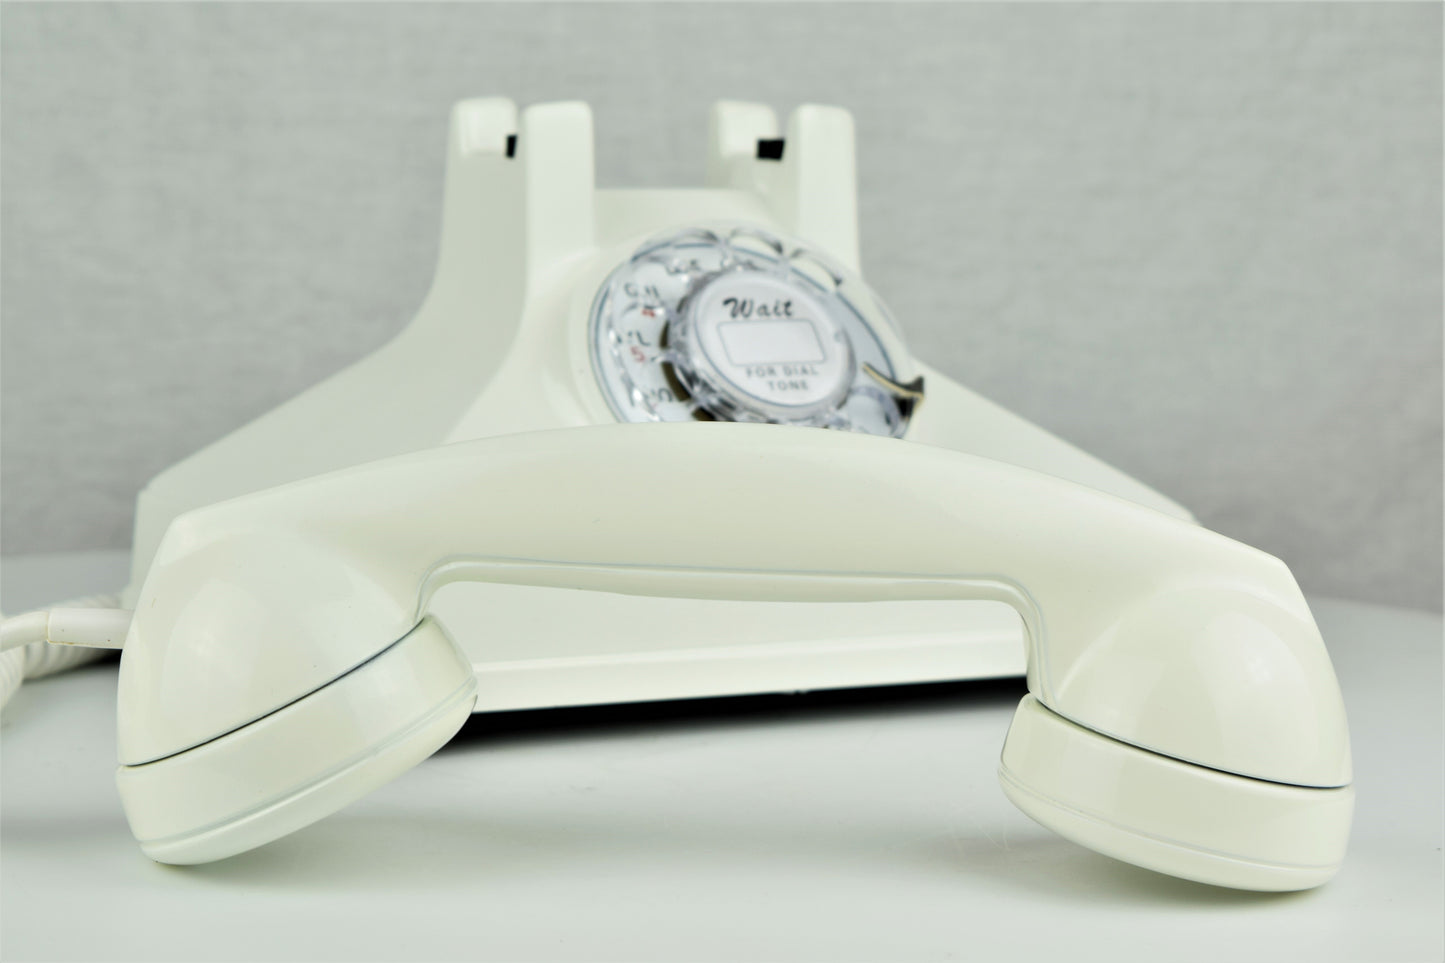 Northern Electric No. 1 Uniphone -White